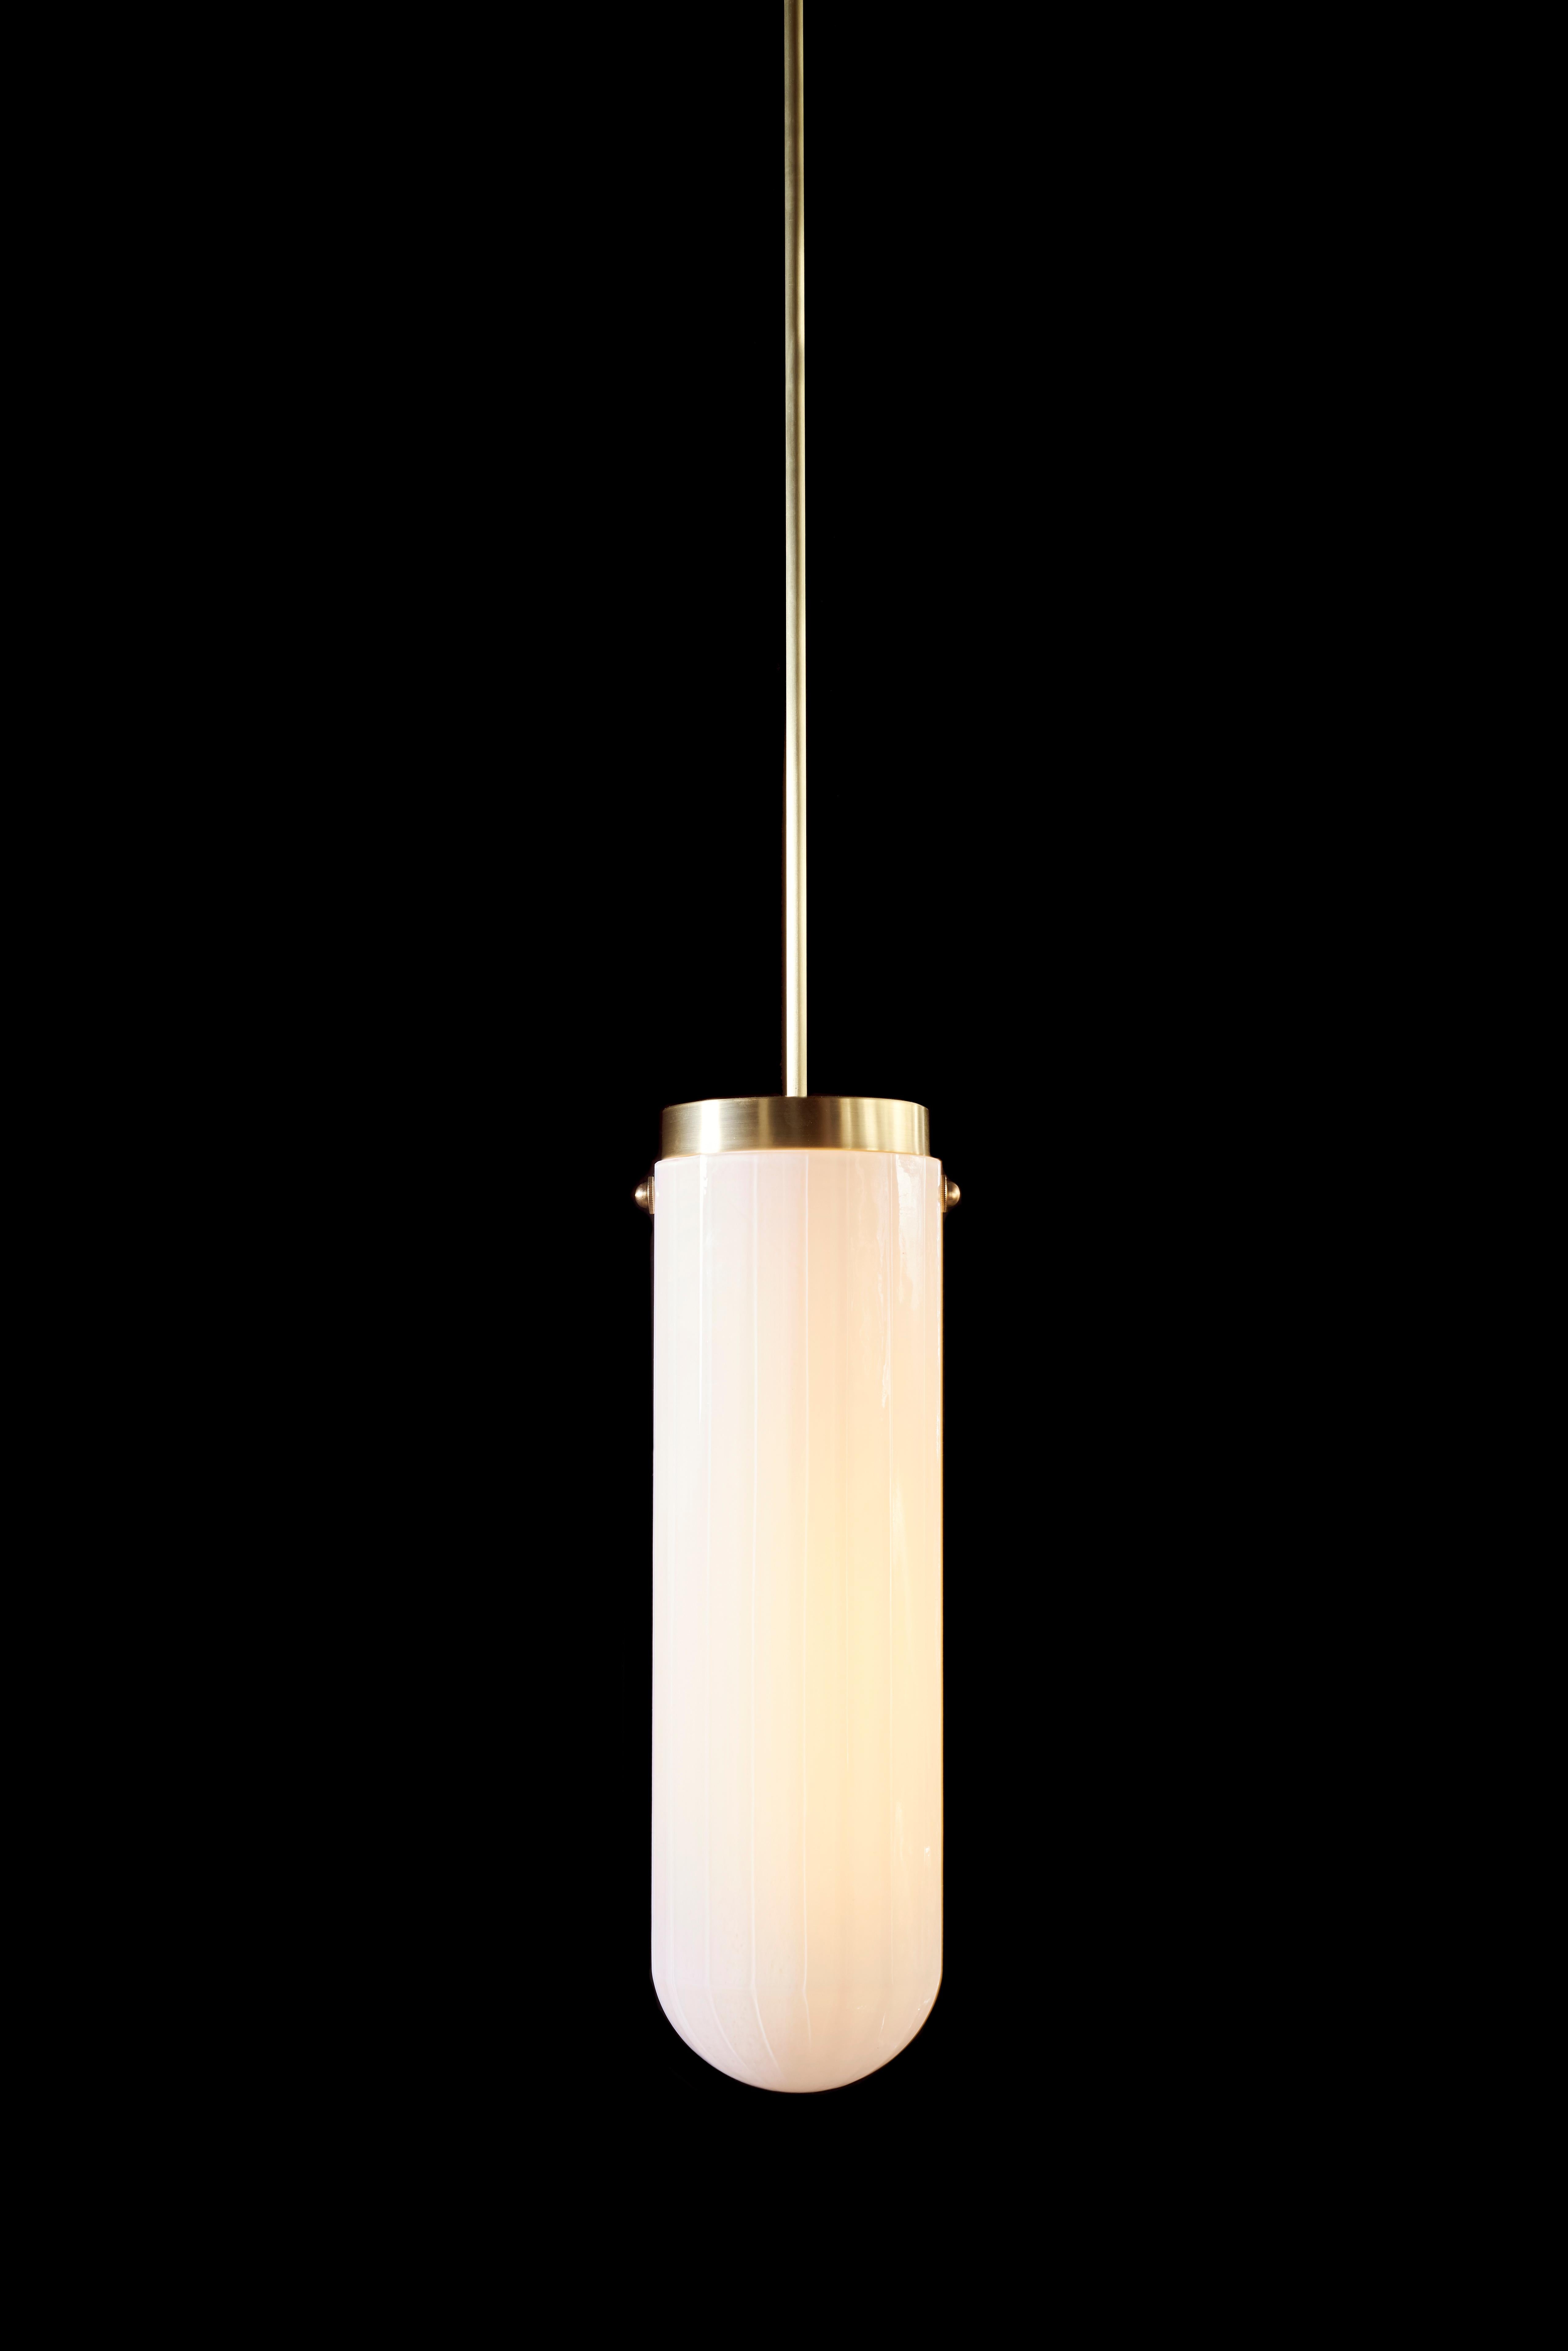 Inspired by Art Moderne, the Helios pendant is part of Bianco Light and Space, streamline series. Encompassing curving forms and linear compositions, this pendant is composed of mold blown faceted glass shown in enamel white with brass hardware.